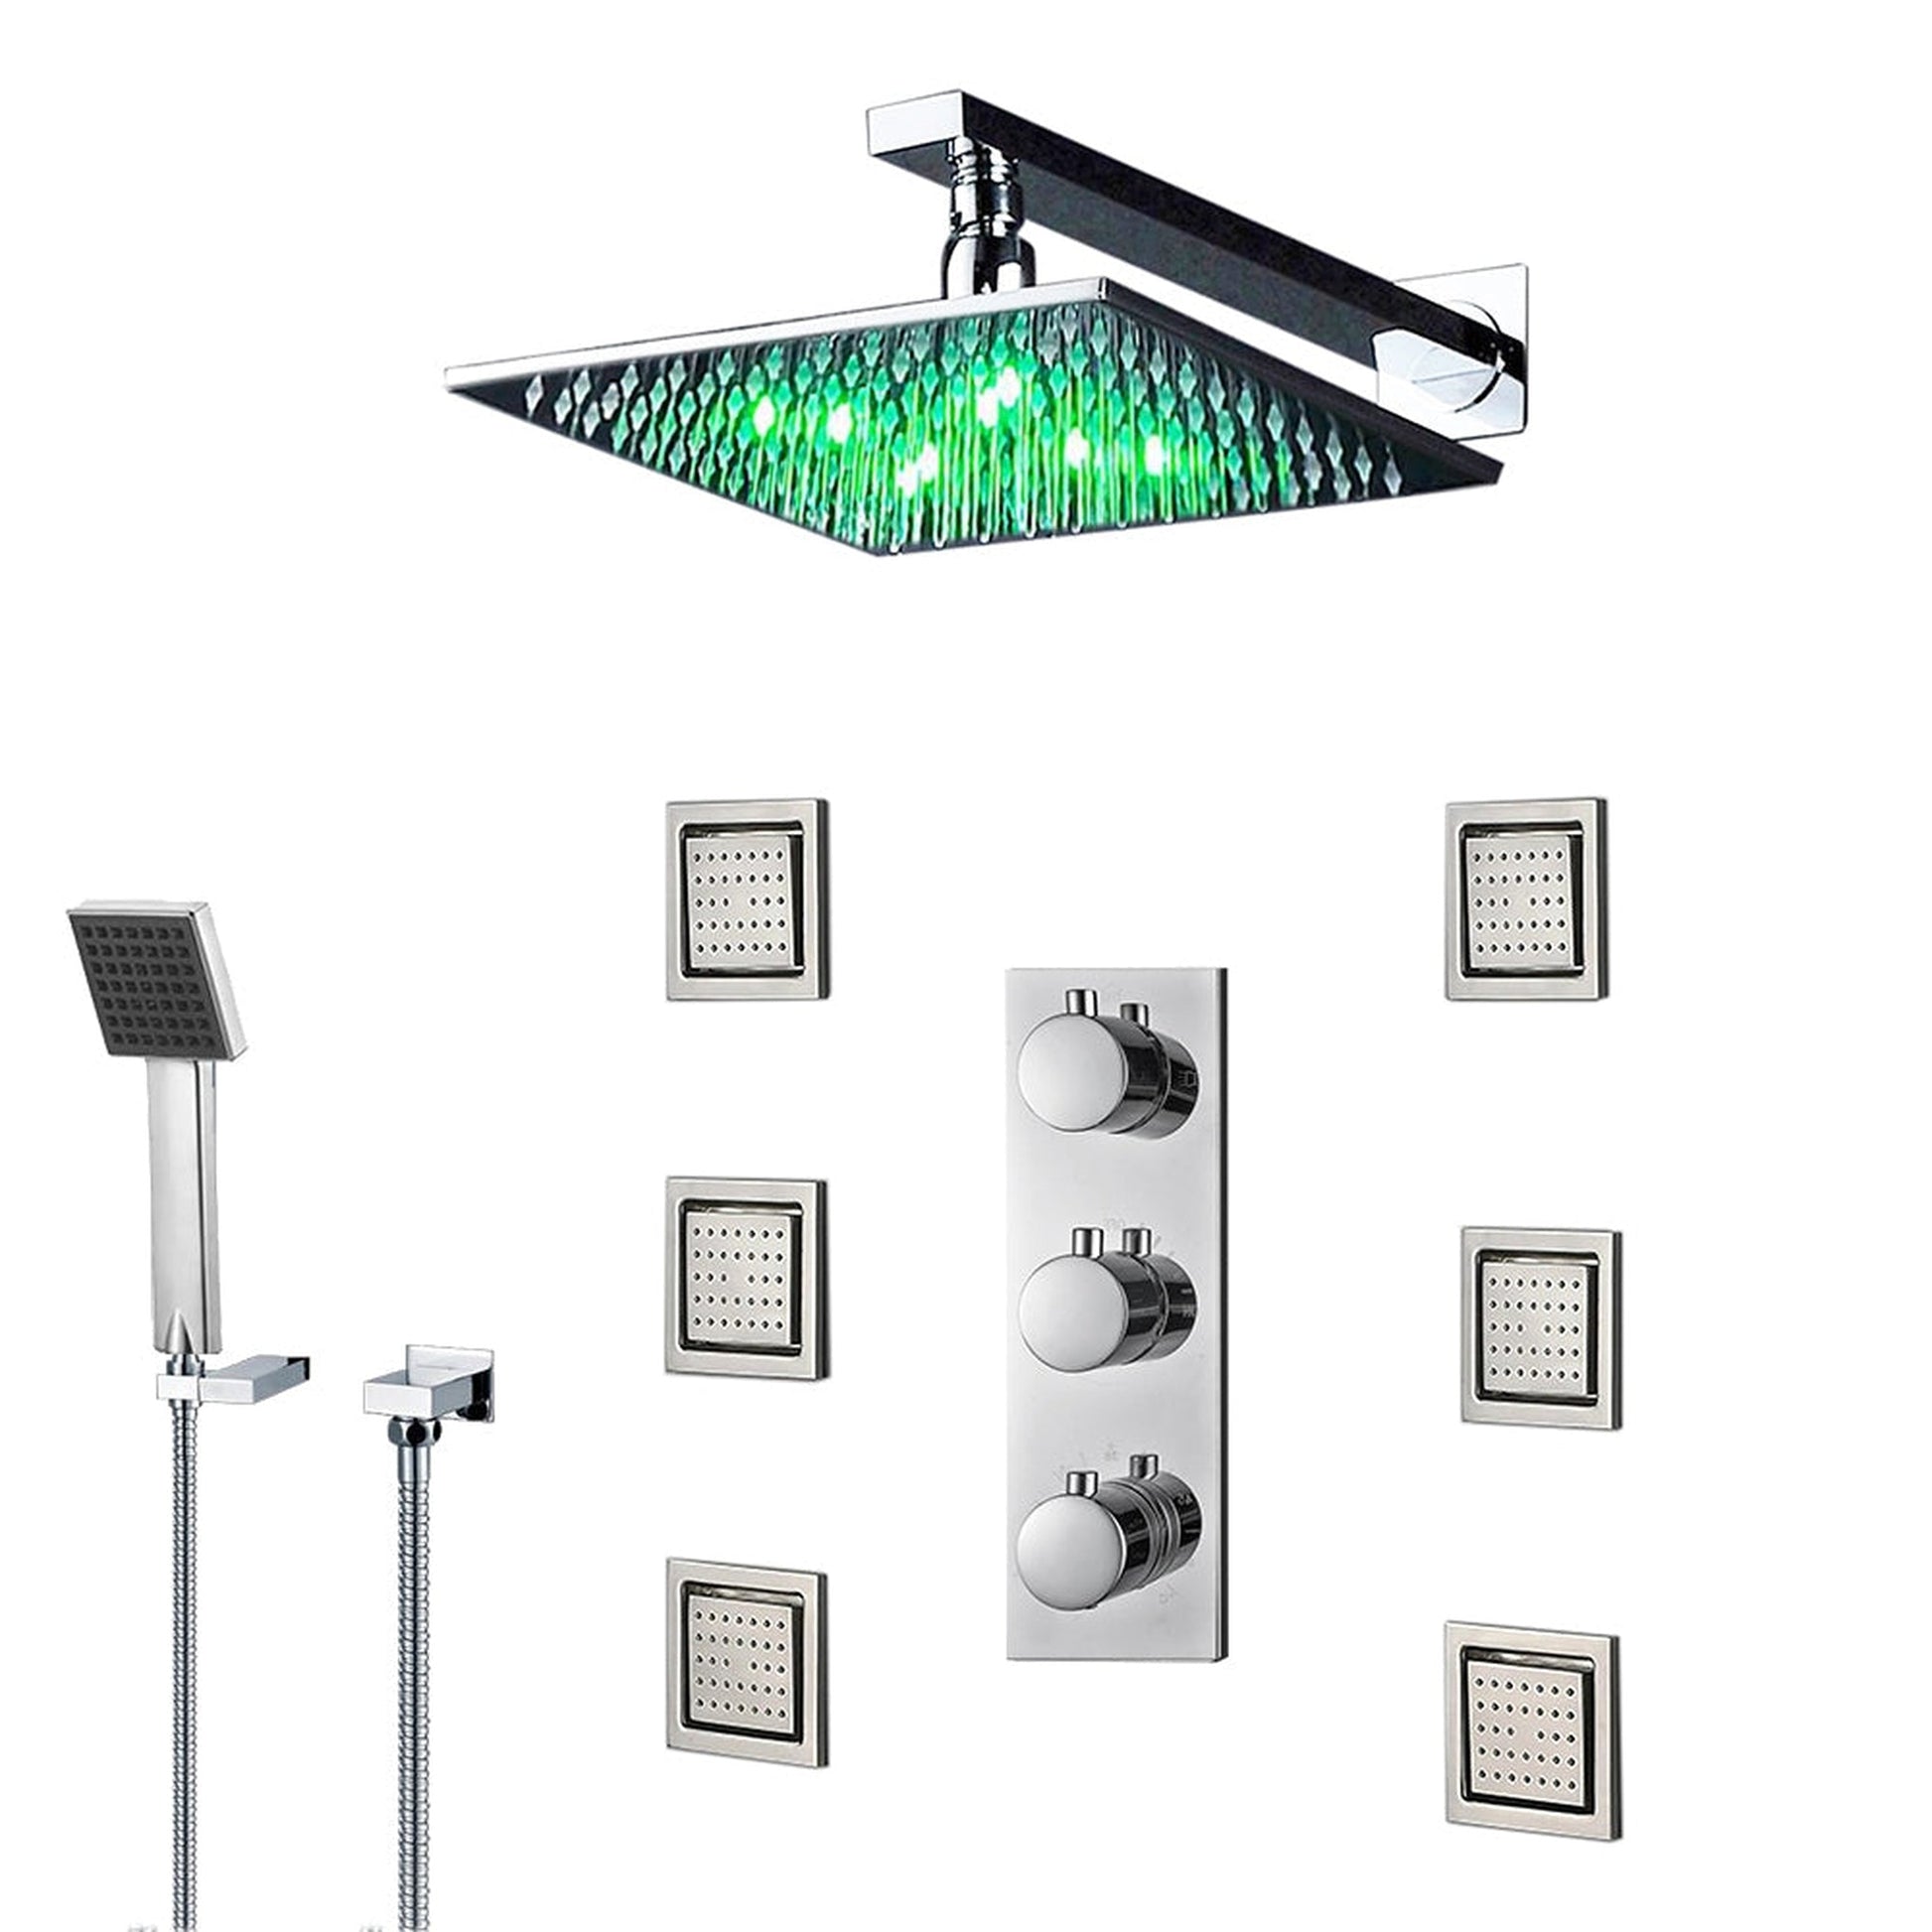 FontanaShowers Milan Creative Luxury 24" Chrome Square Wall-Mounted LED Rainfall Shower System With 6-Jet Stainless Steel Massage Sprays and Hand Shower